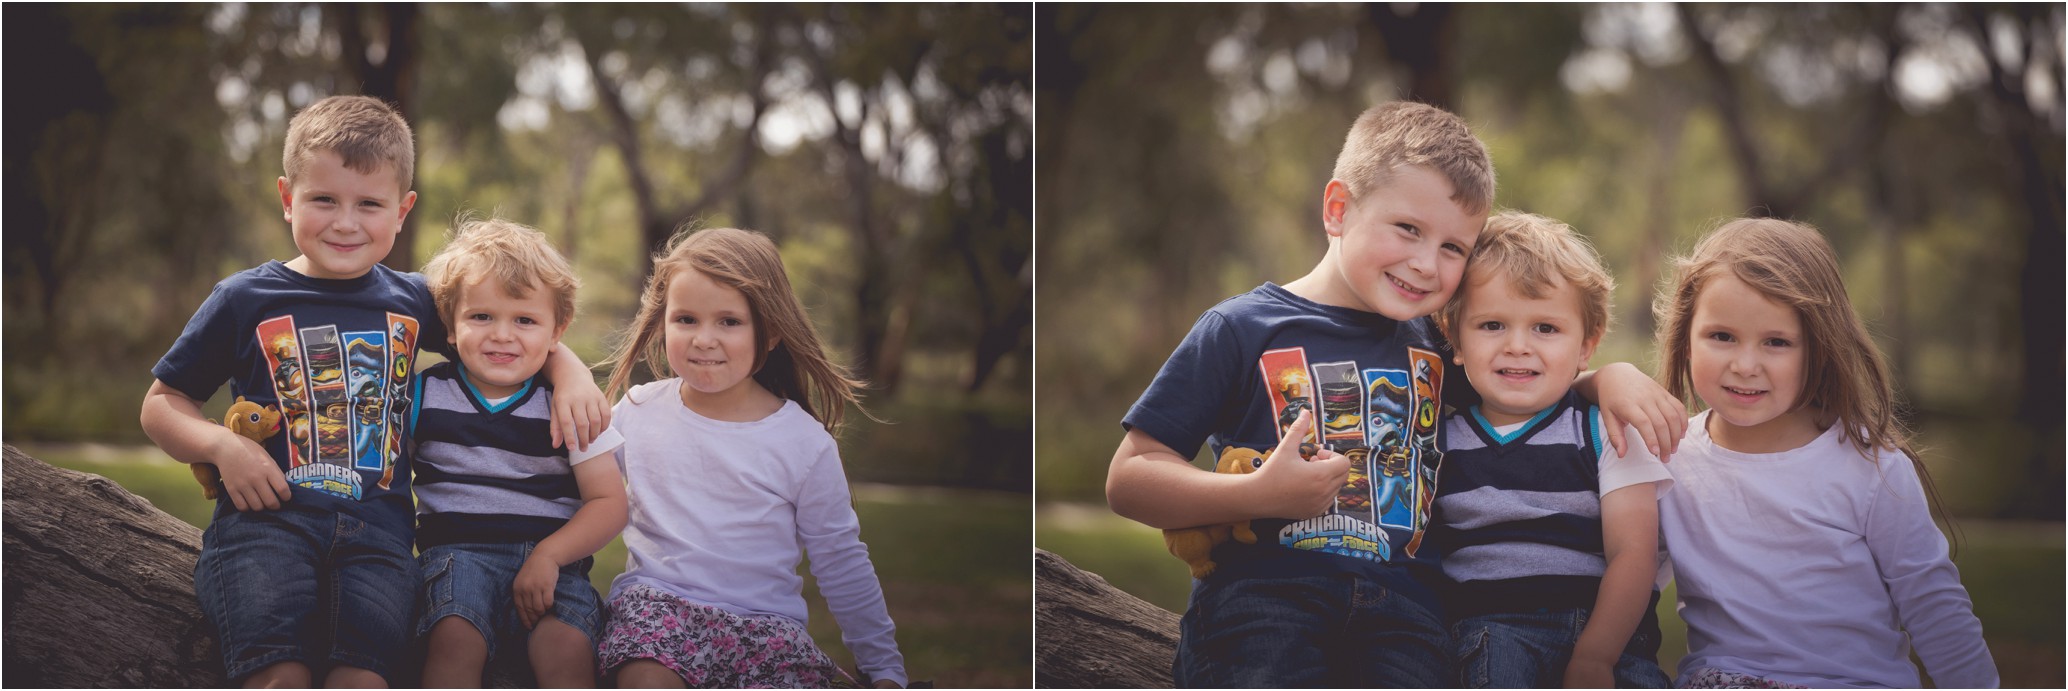 Family Photography Geelong_0756